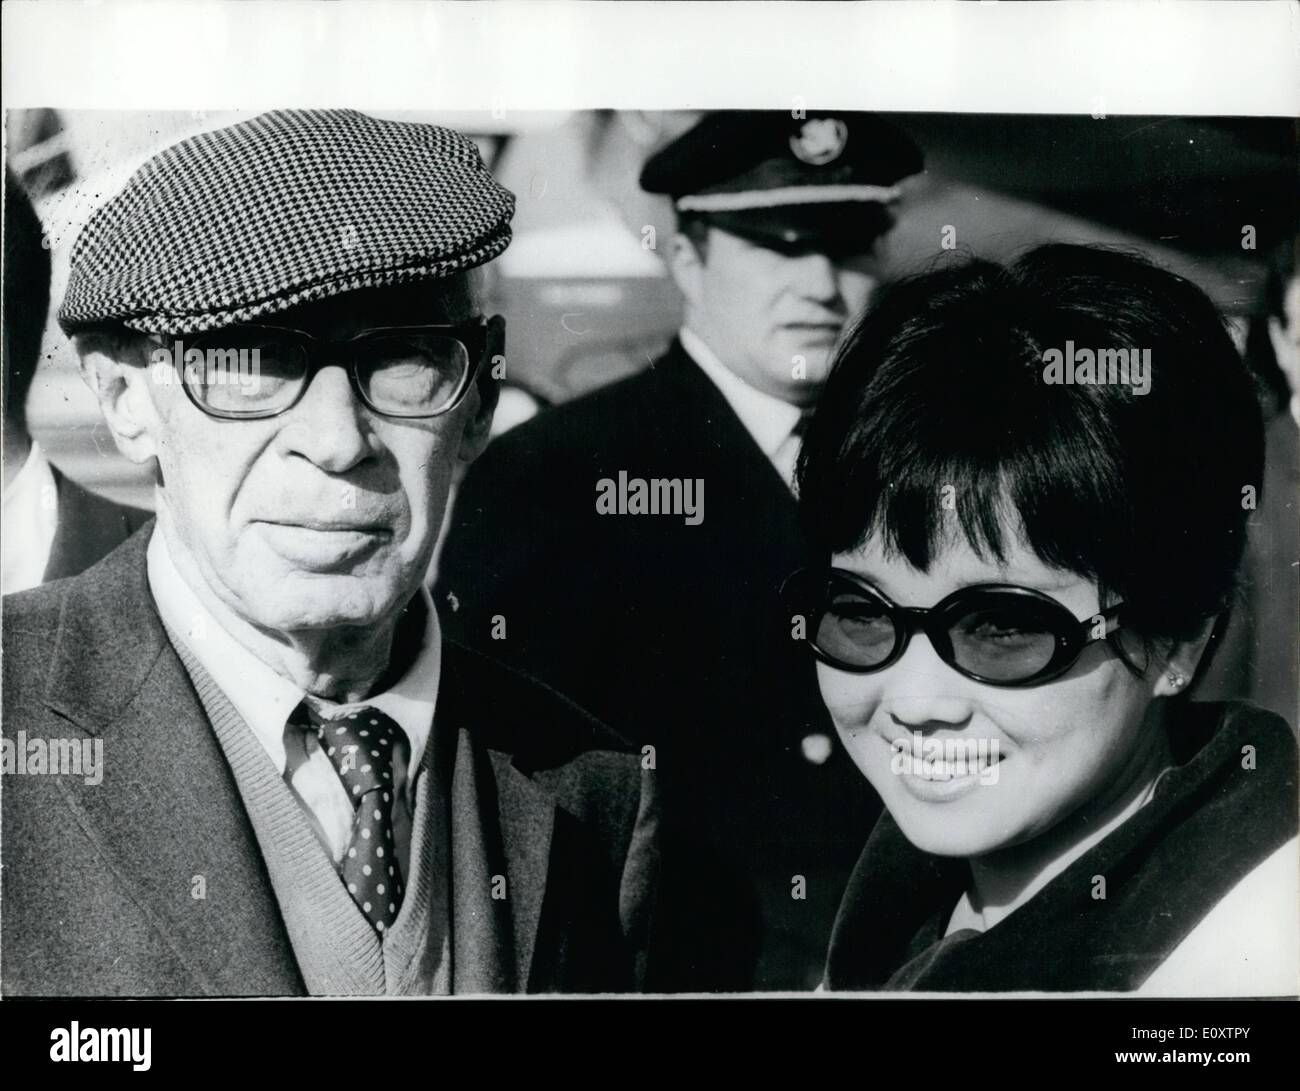 Sep. 09, 1967 - Henry Miller and His Bride Arrive in Paris. Henry Miller the 79 year old author from America arrived in Paris this afternoon with his 29 year old Japanese Bride Hoki Tokuda who is a singer. This is Henry Miller's fifth bride. Photo Shows: Henry Miller and his Japanese bride who he married last week in Los Angeles seen arriving in Paris for their honeymoon. Stock Photo